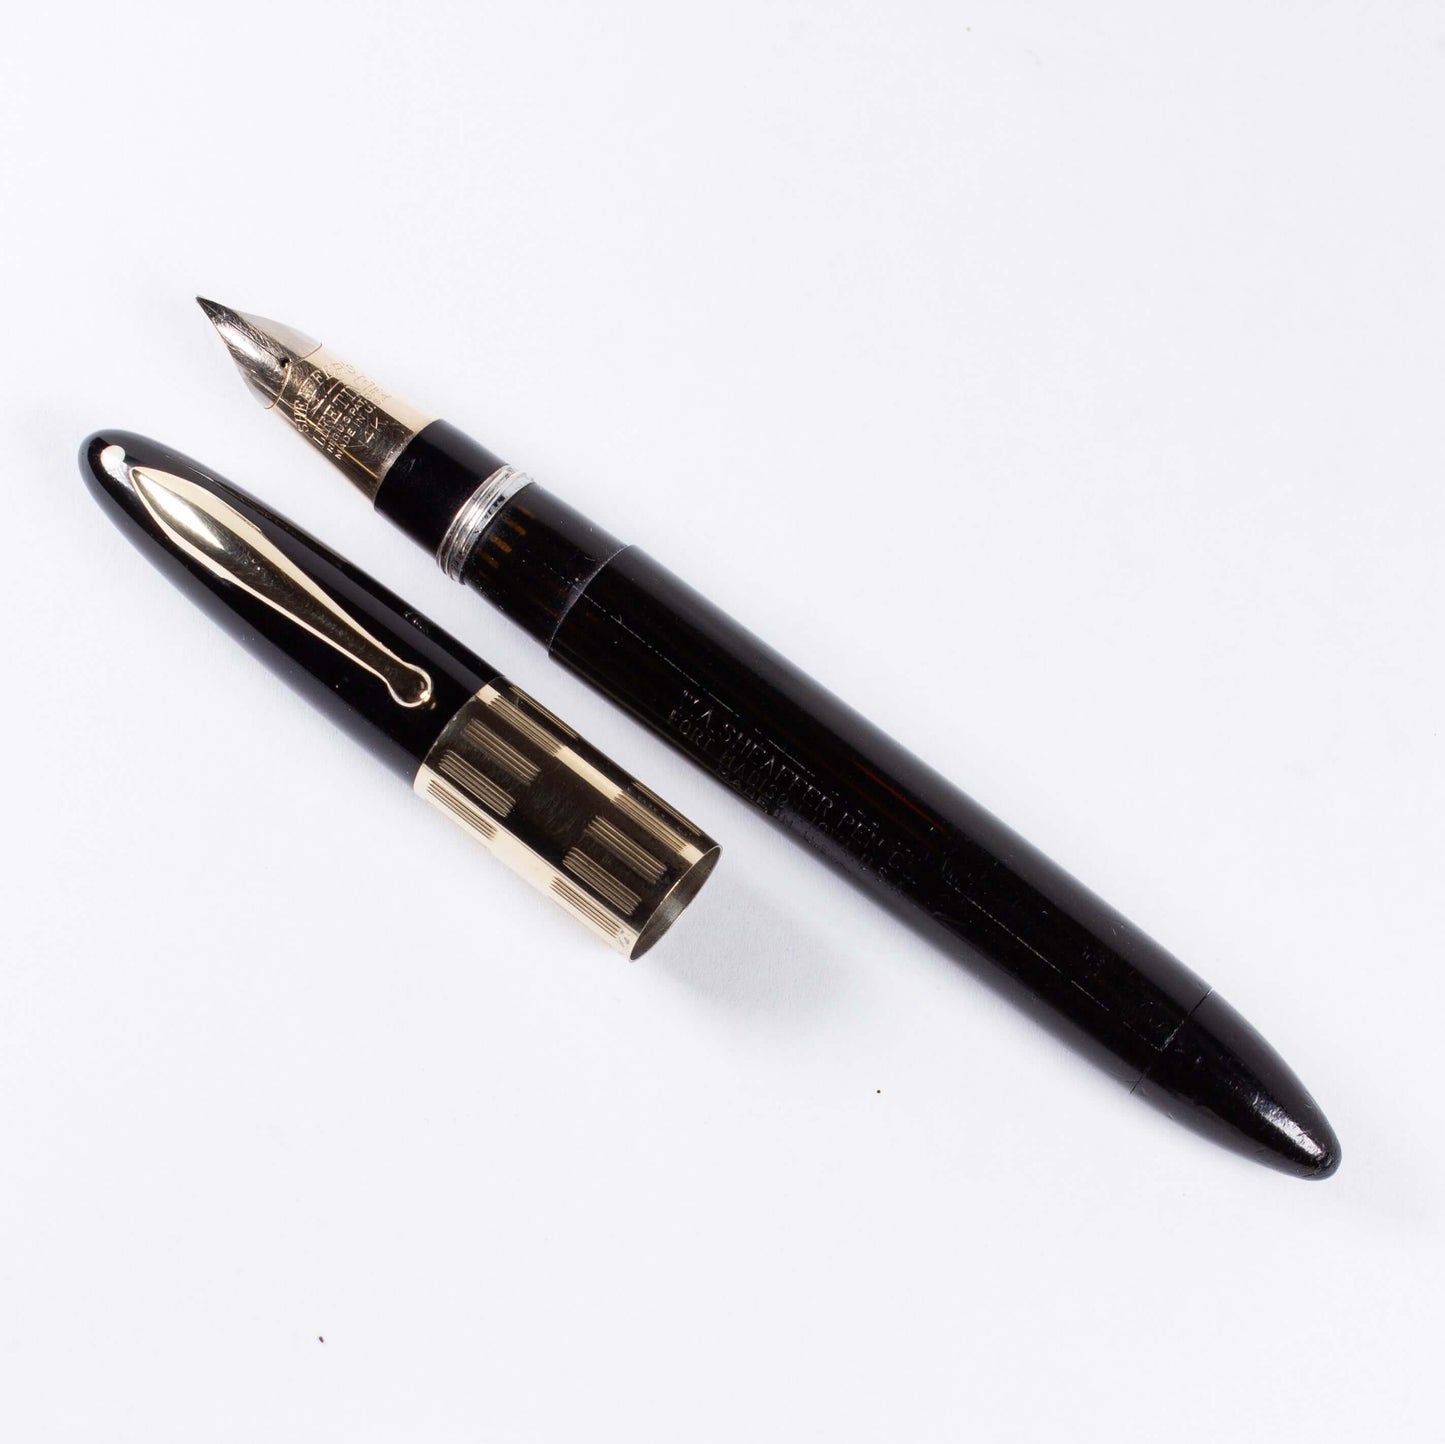 ${titleType: Vintage Vac-Fil Fountain Pen Product name: Sheaffer Vacuum-Fil Manufacturer and Year: 1940's Length: 5 inch Filling System: Vacuum-Fil, Plunger Filler Color/Pattern: Black Nib Type/Condition and remarks: Medium 14K two-tone Triumph Nib Condit